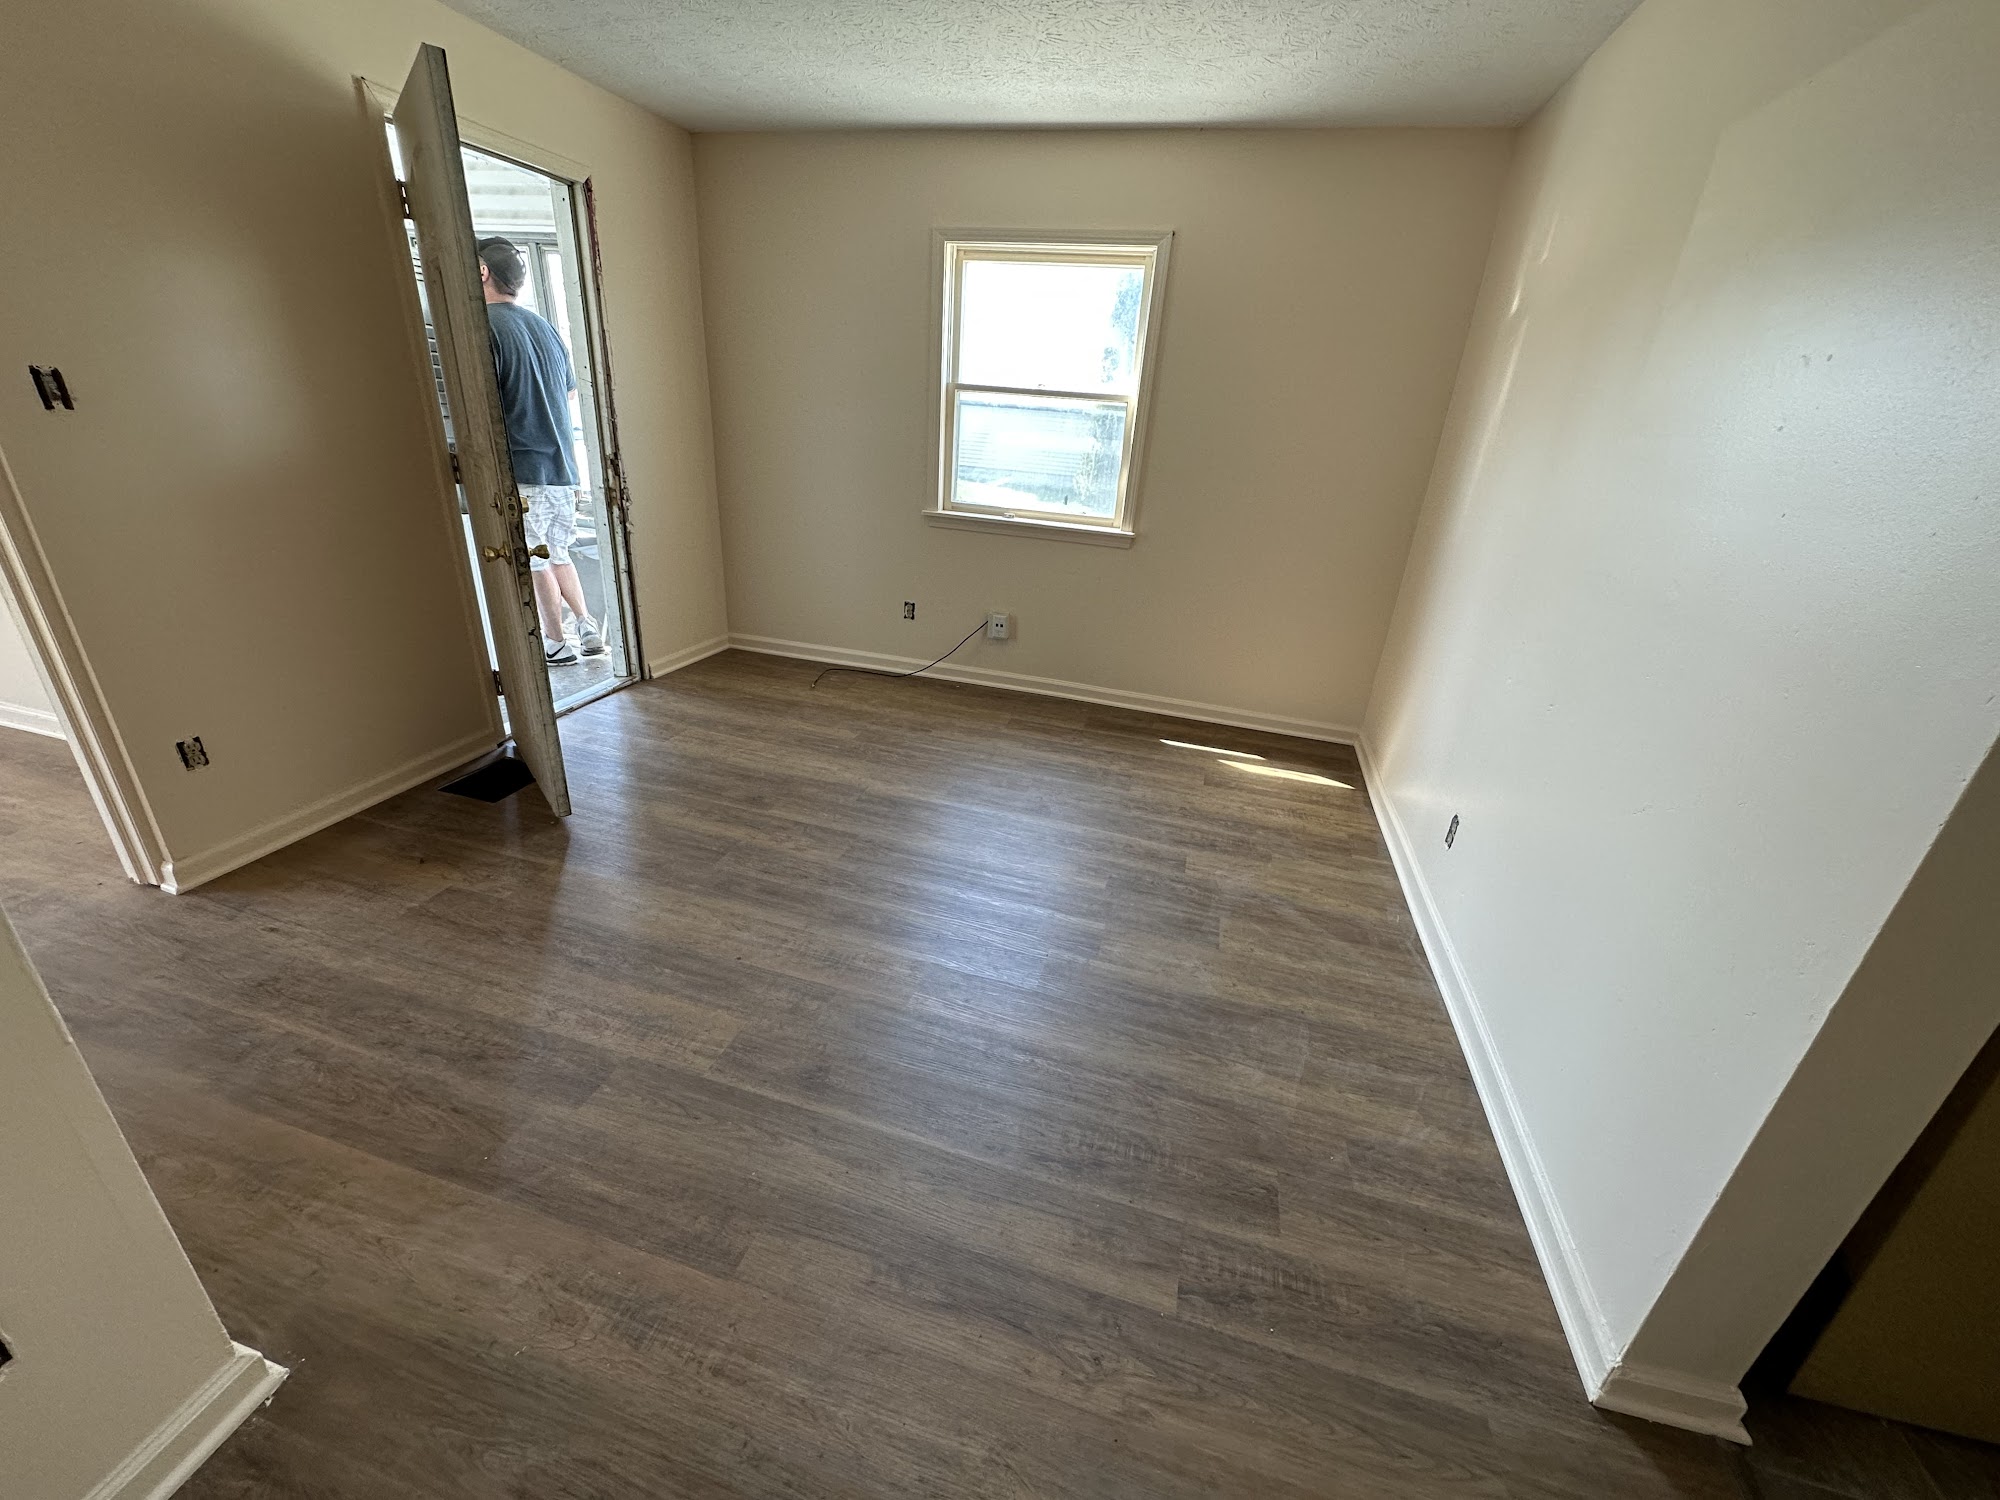 Gephart’s Flooring and Painting Plus